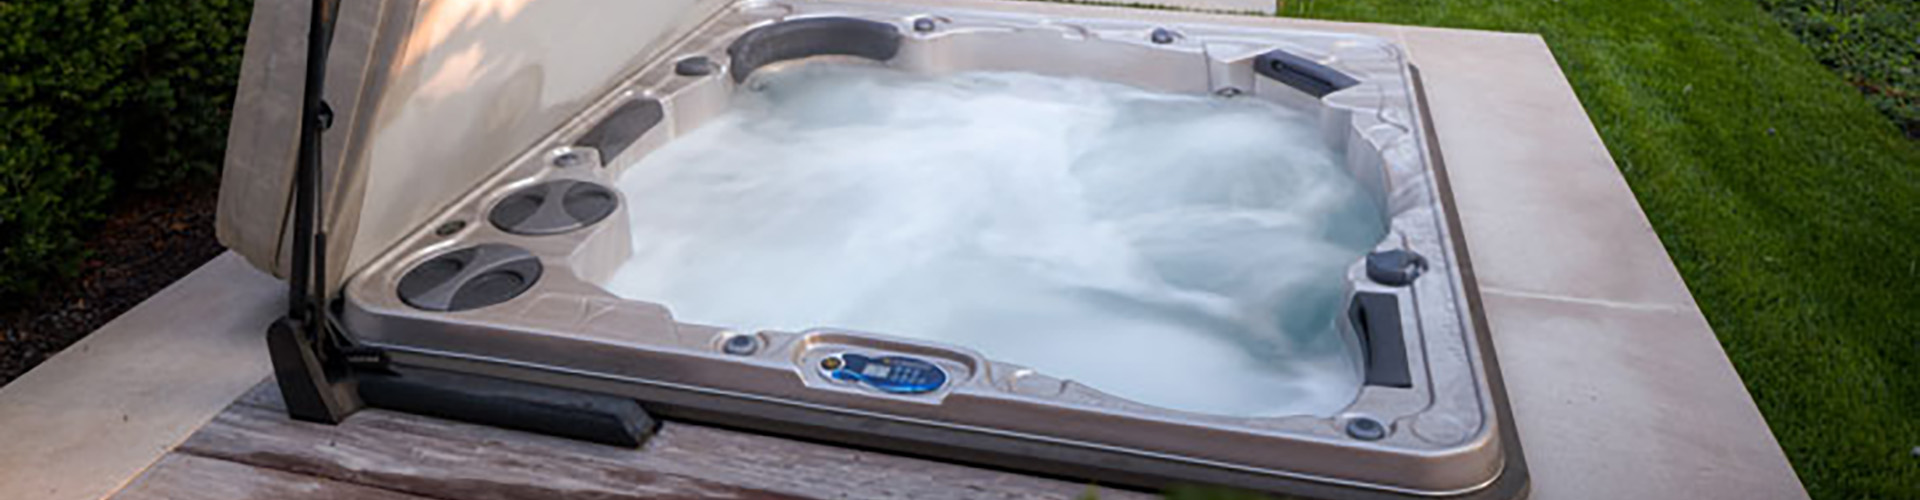 Are Hot Tub Water Test Strips Accurate?